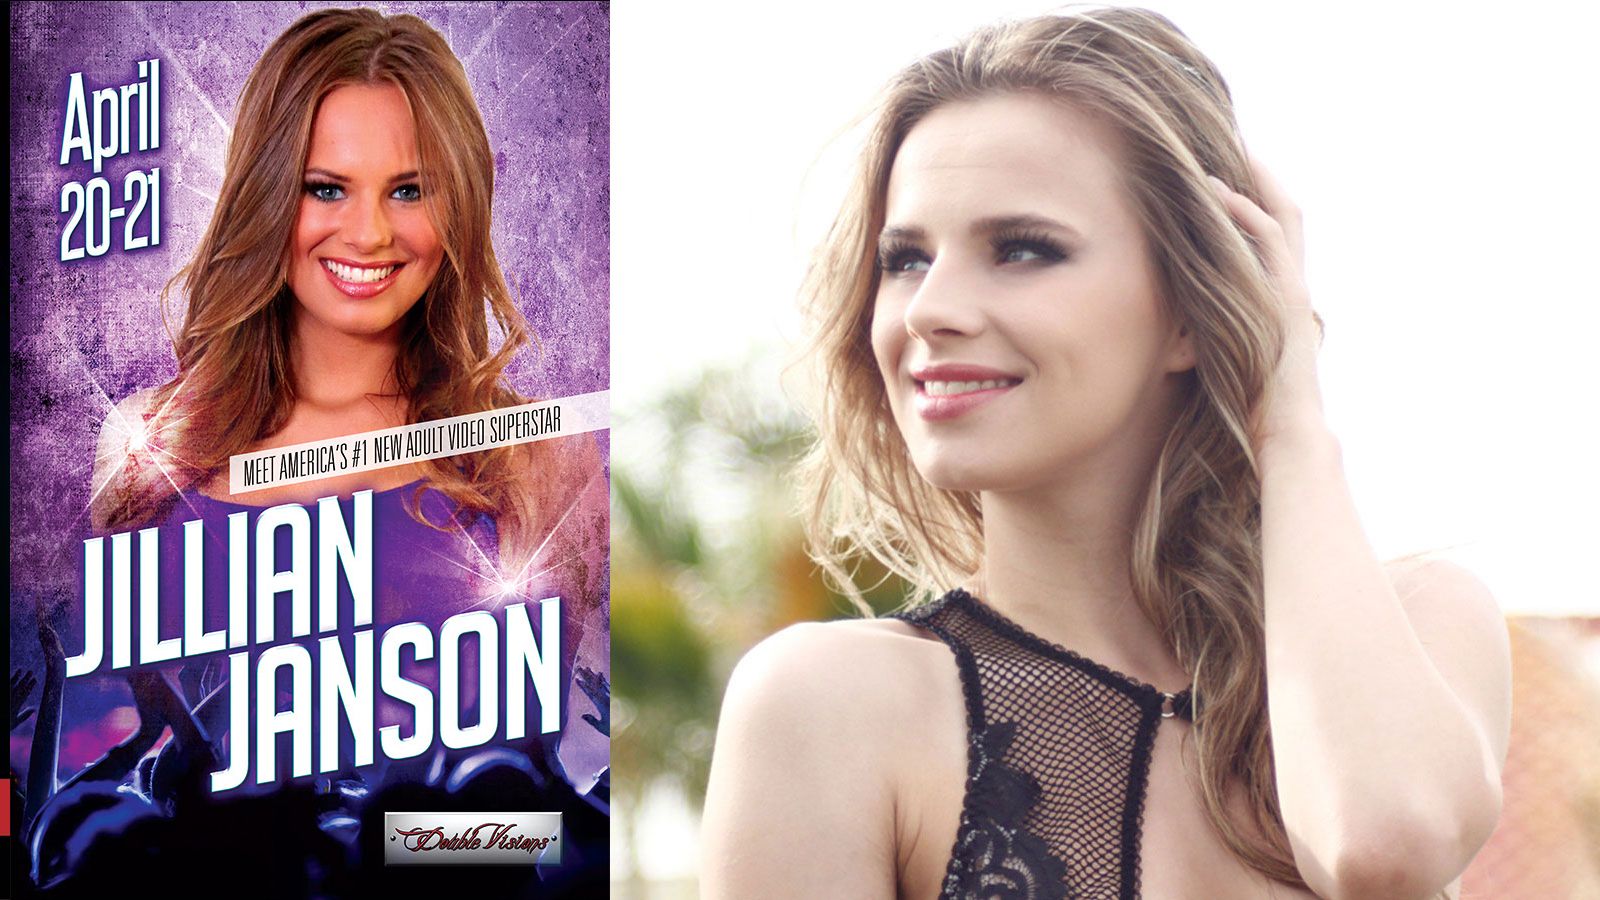 Jillian Janson To Feature At Double Visions Go-Go In Horsham, PA